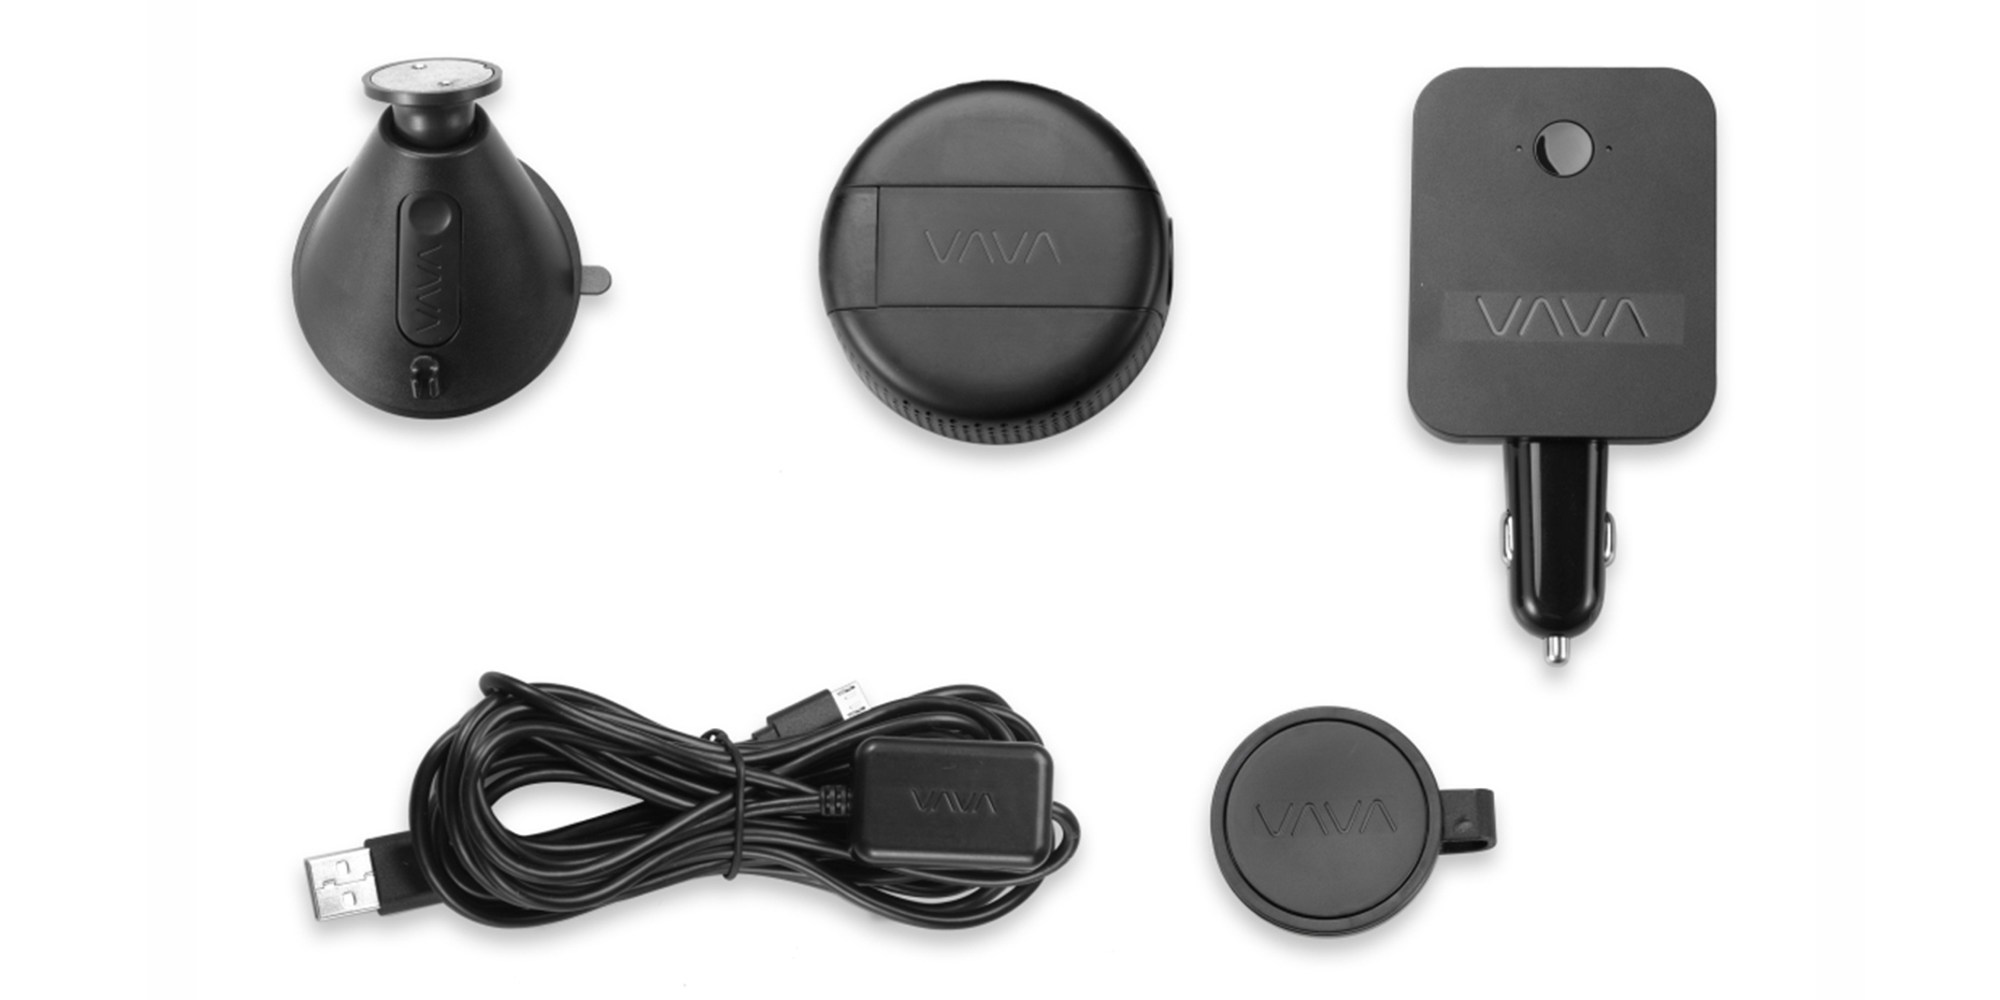 Review: The iPhone-enabled VAVA Dash Cam packs robust features into a sleek  form-factor